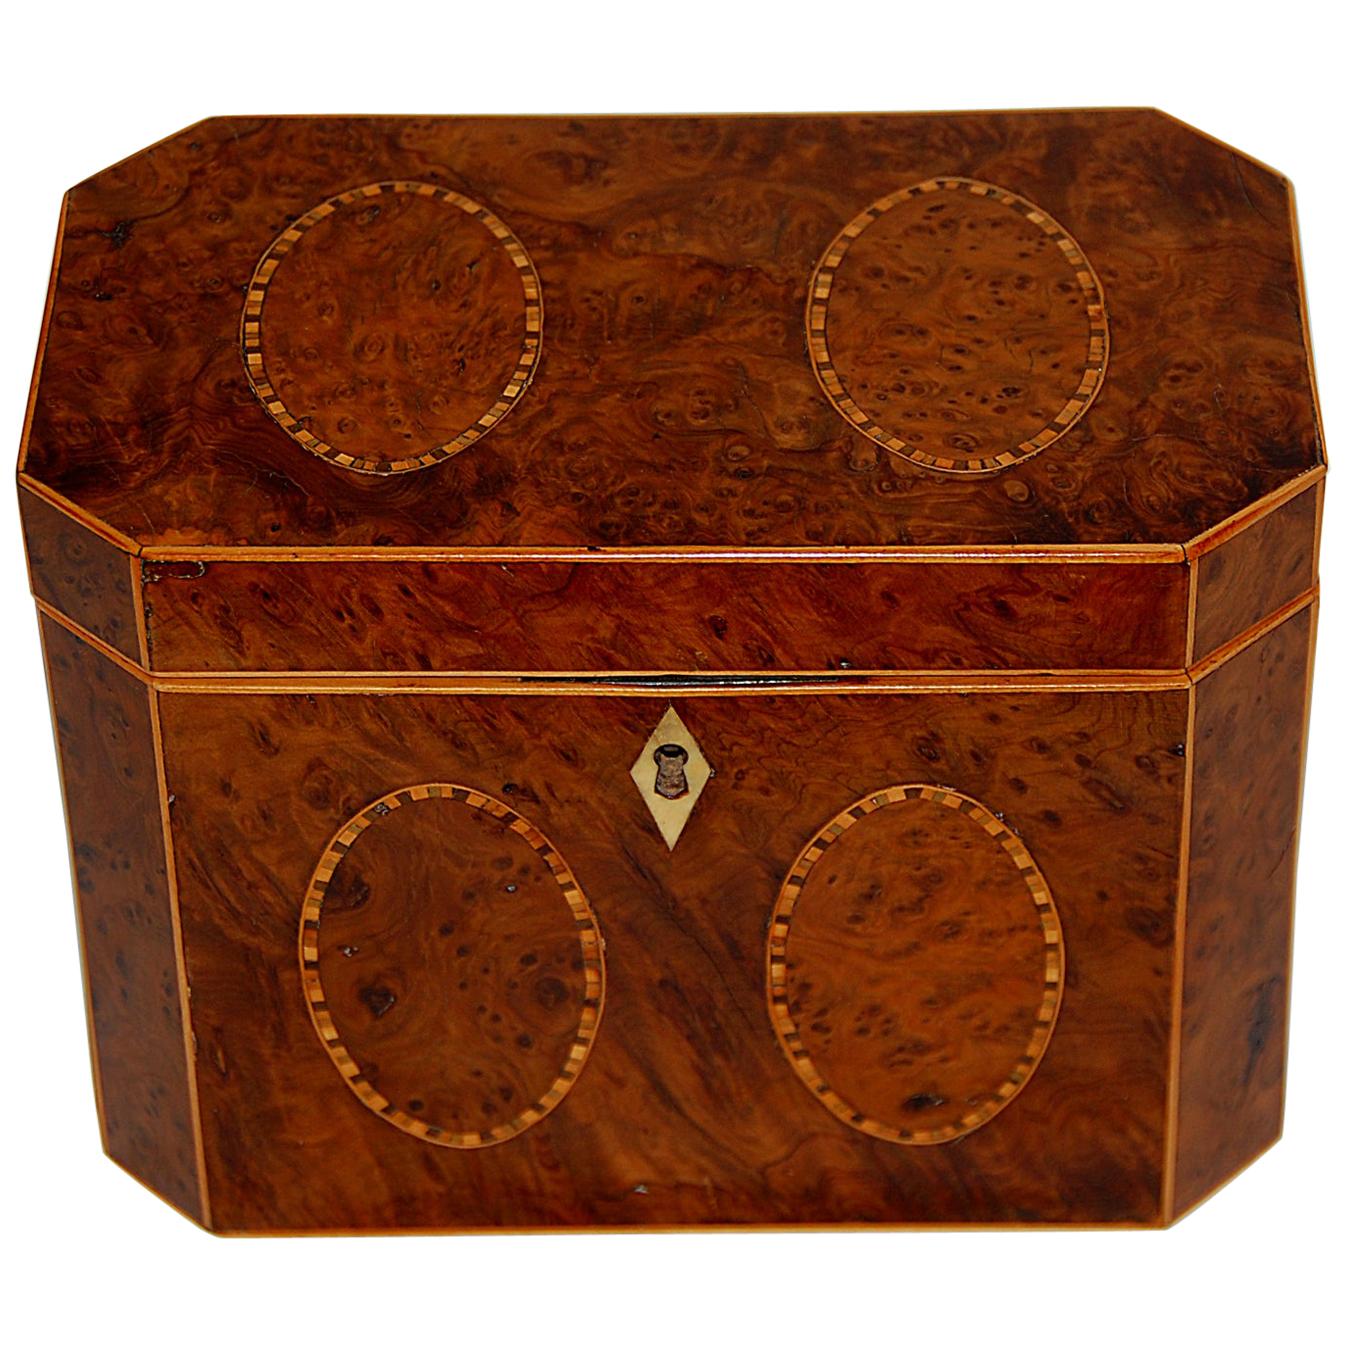 English Georgian Yew Wood Octagonal Tea Caddy with Oval Inlays on Five Sides